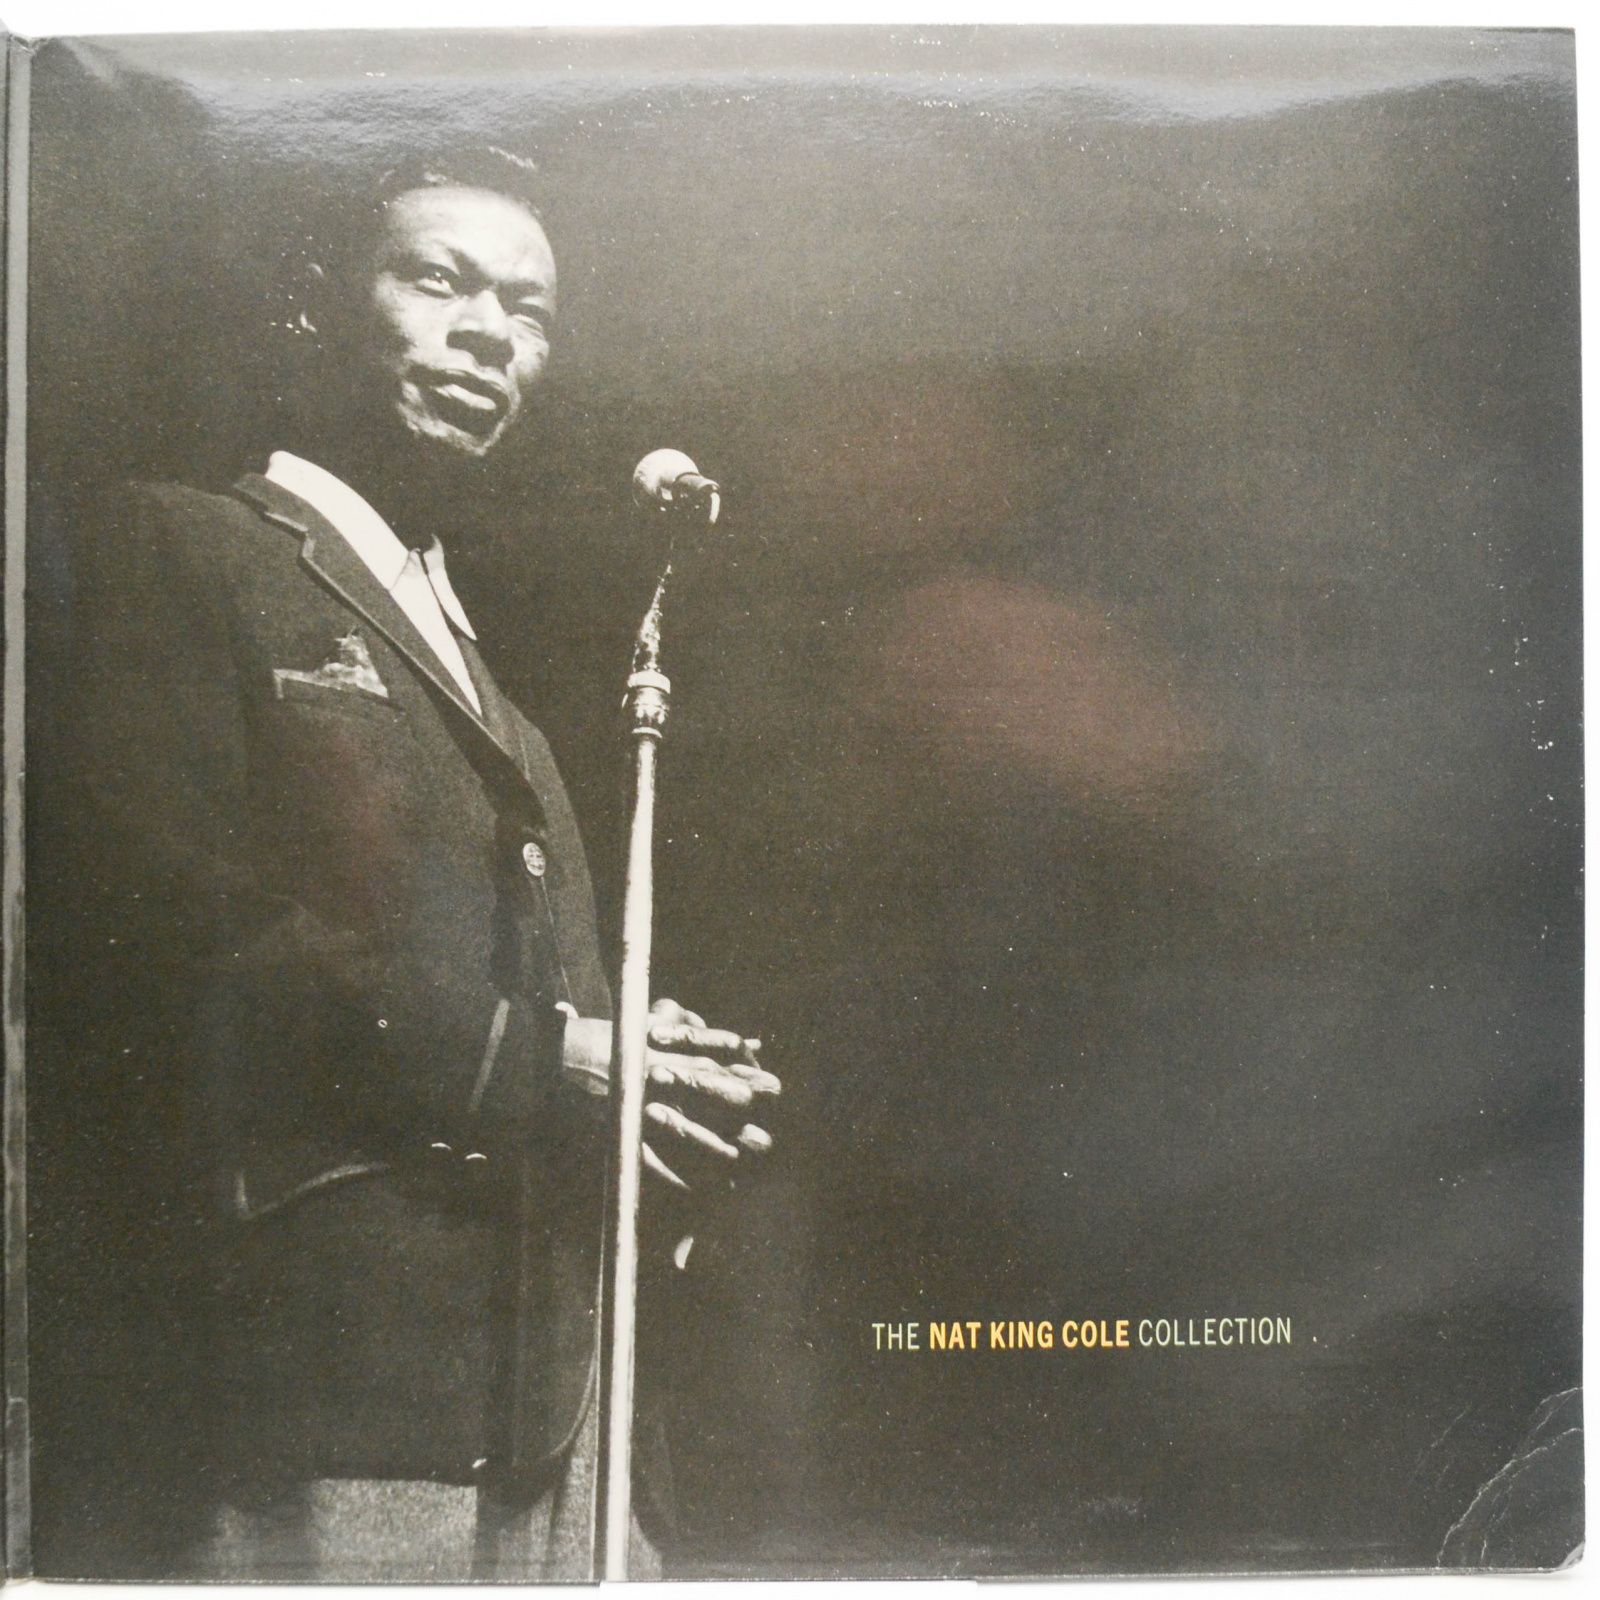 Nat King Cole — The Nat King Cole Collection (2LP, UK), 1986